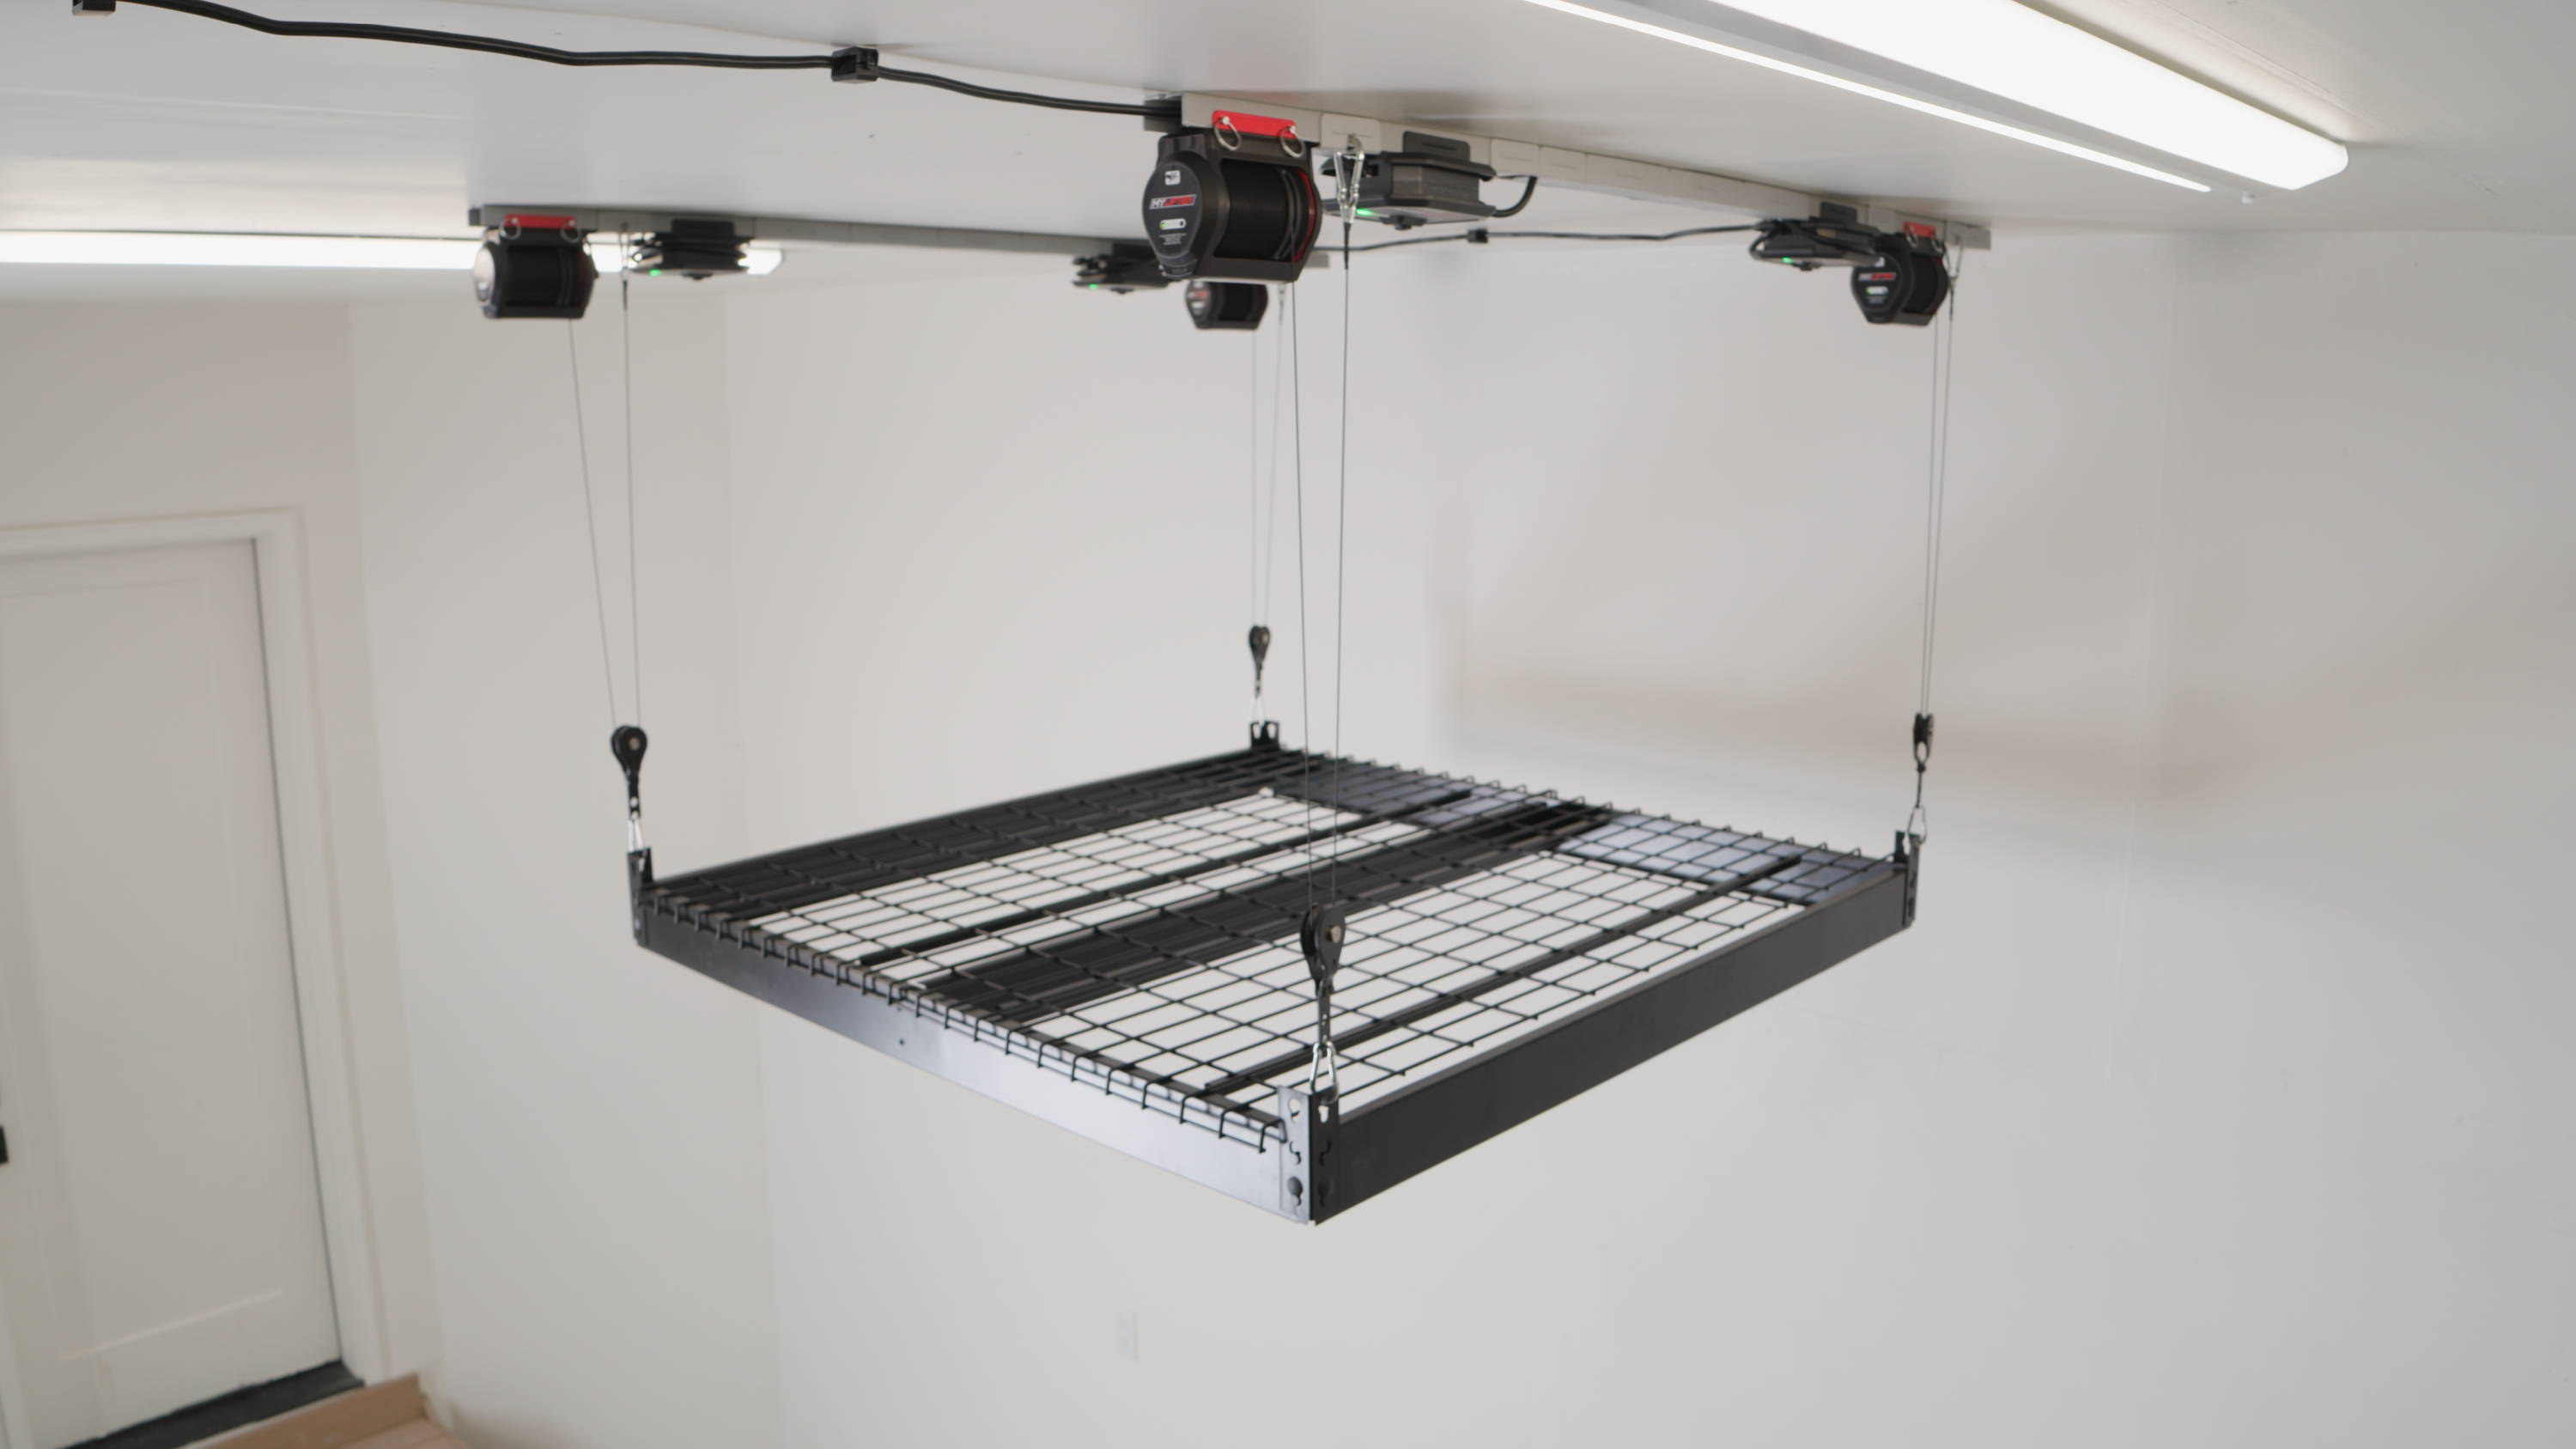 SmarterHome 4x4 Platform Storage Lifter What's Included